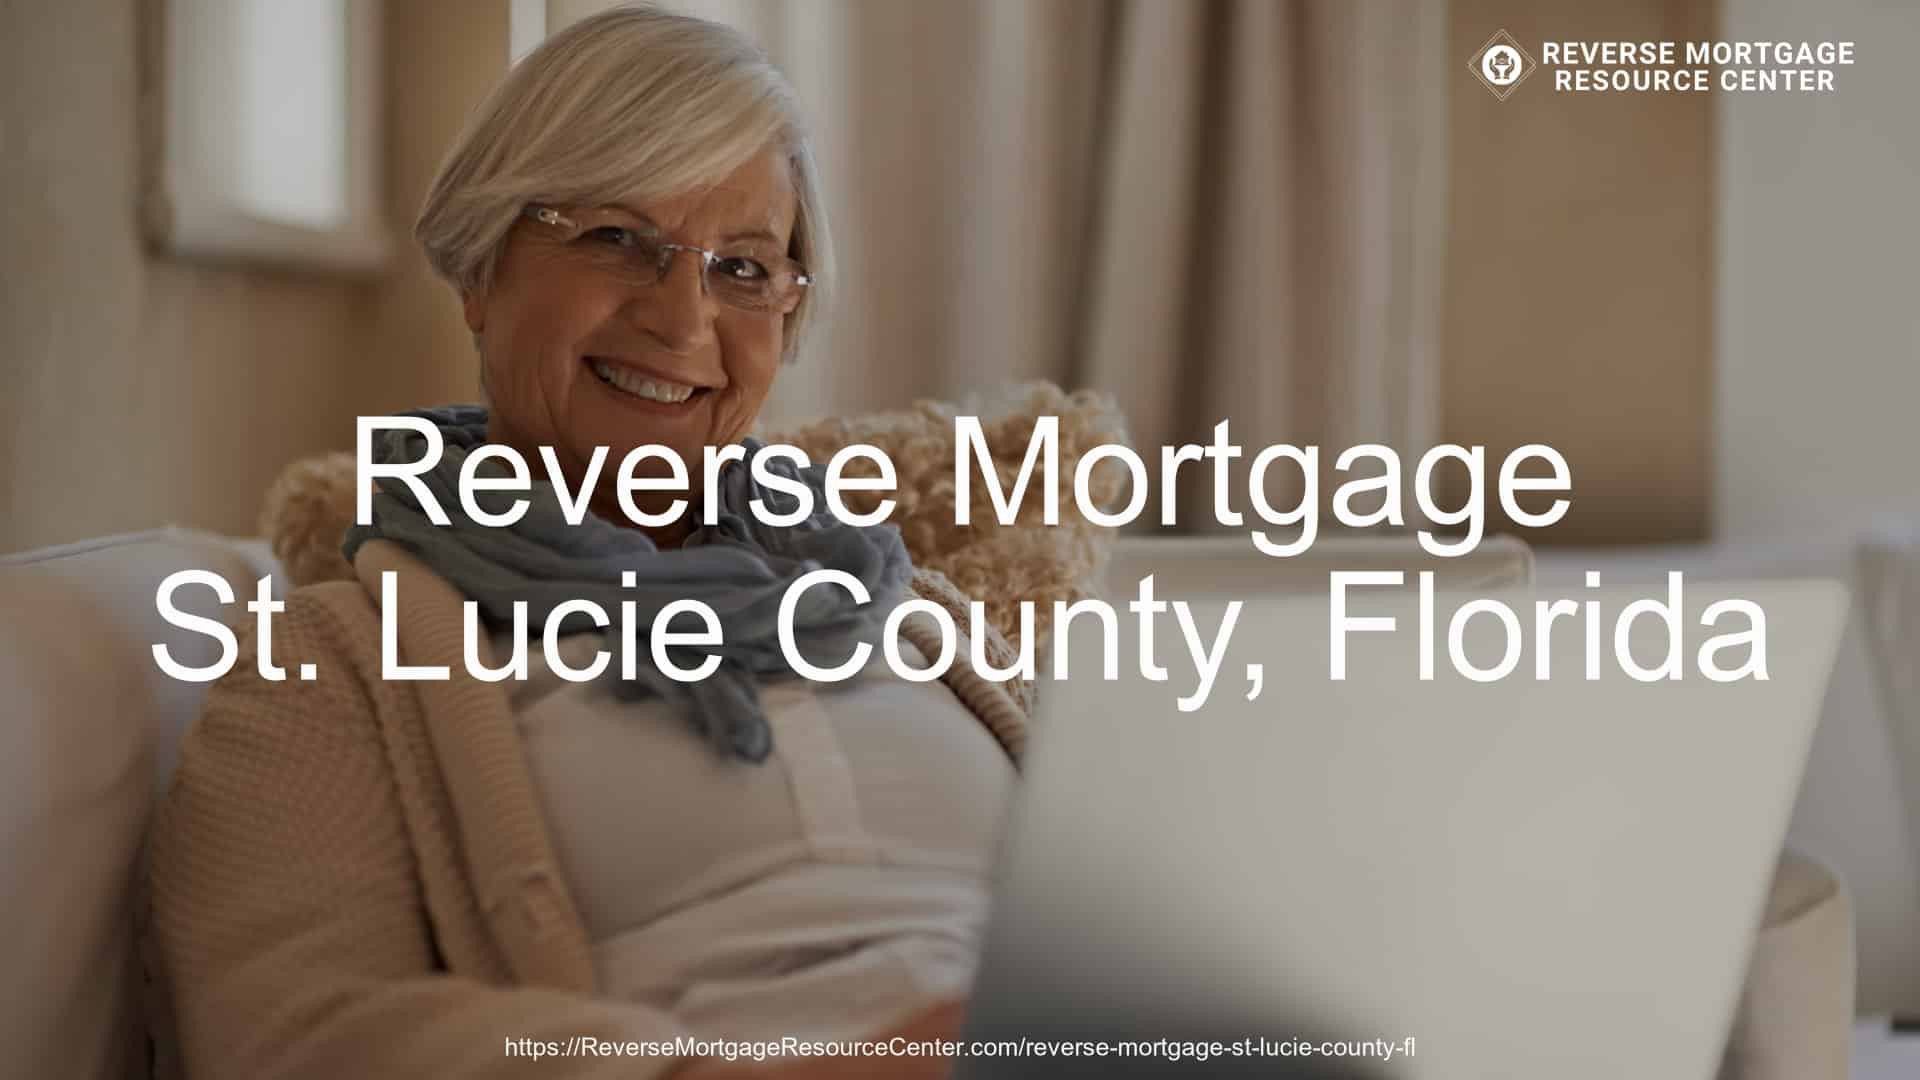 Reverse Mortgage Loans in St. Lucie County Florida